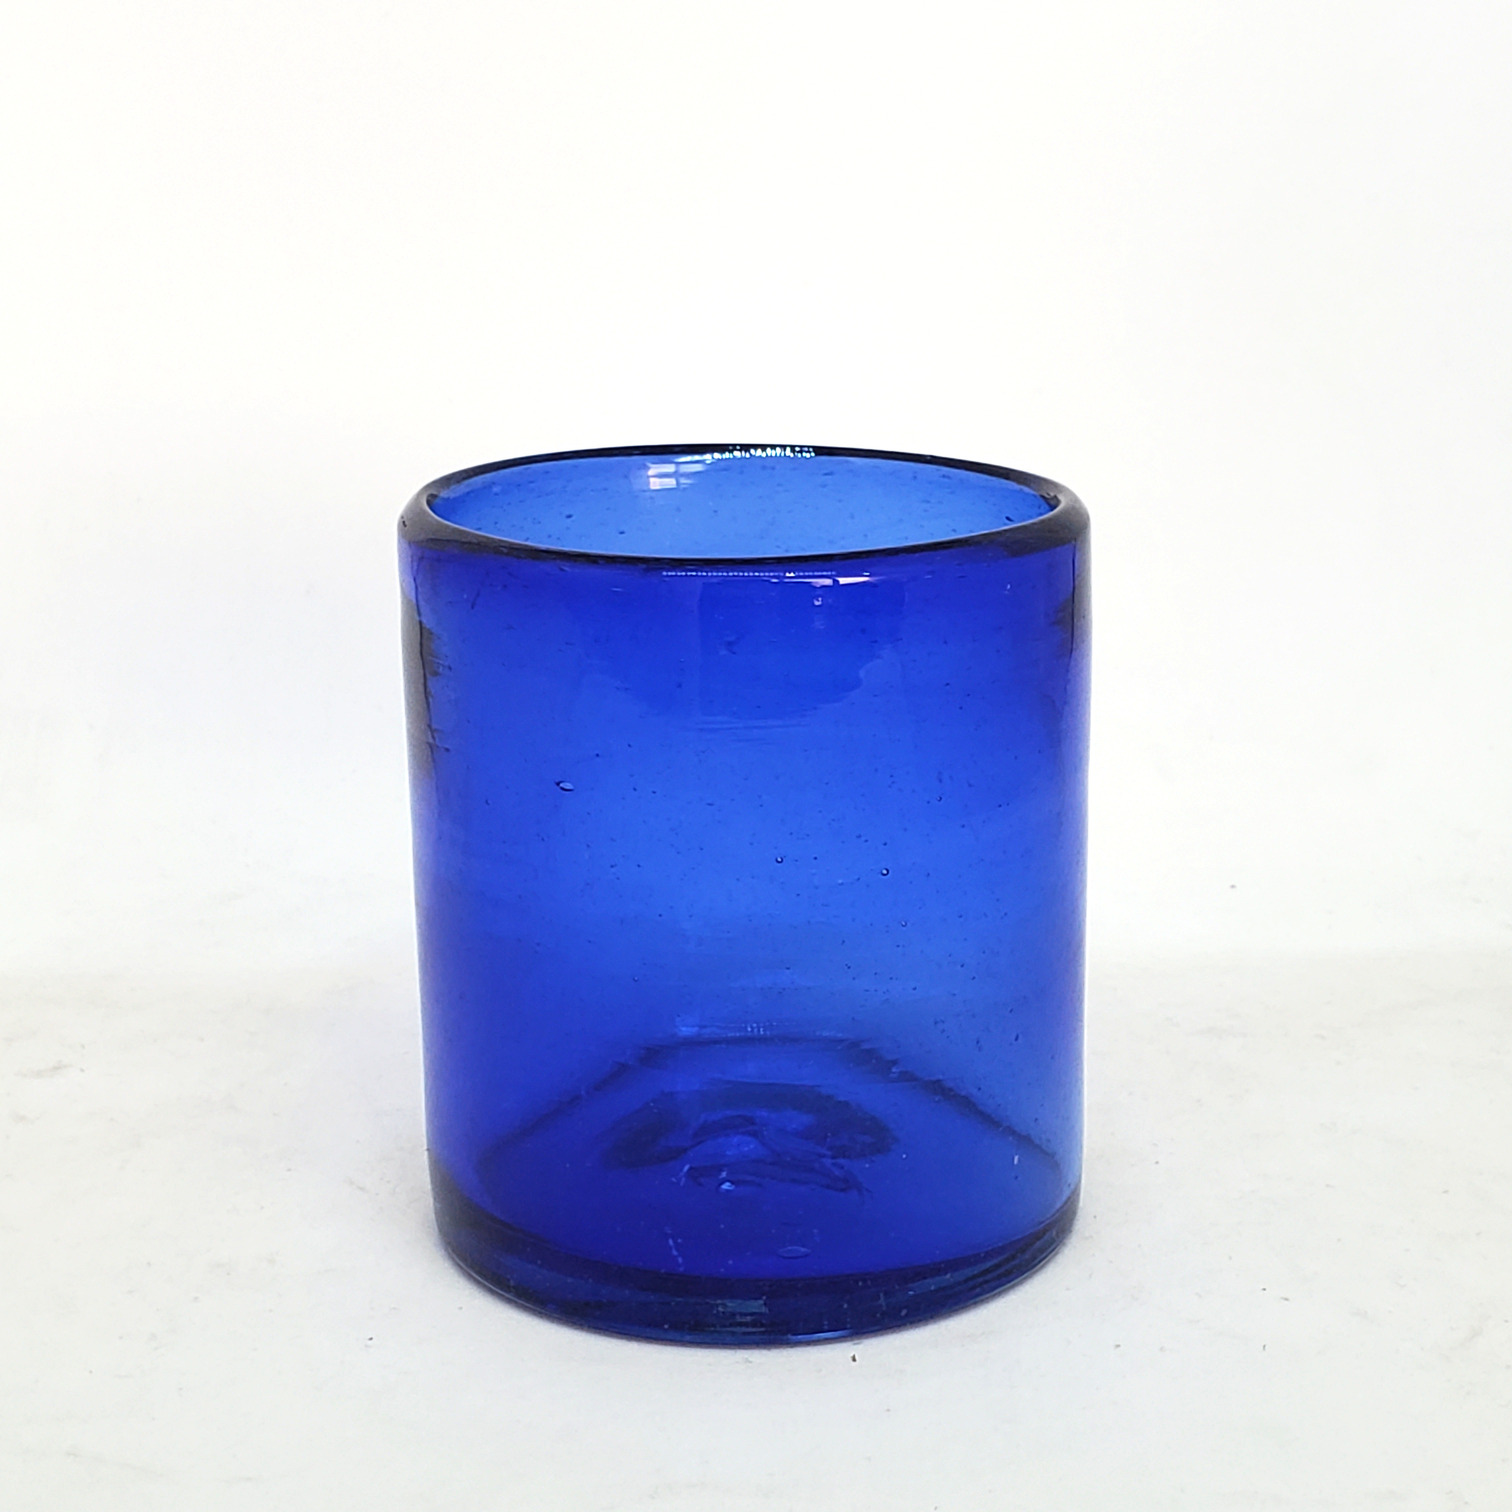 Wholesale Colored Glassware / Solid Cobalt Blue 9 oz Short Tumblers  / Enhance your favorite drink with these colorful handcrafted glasses.